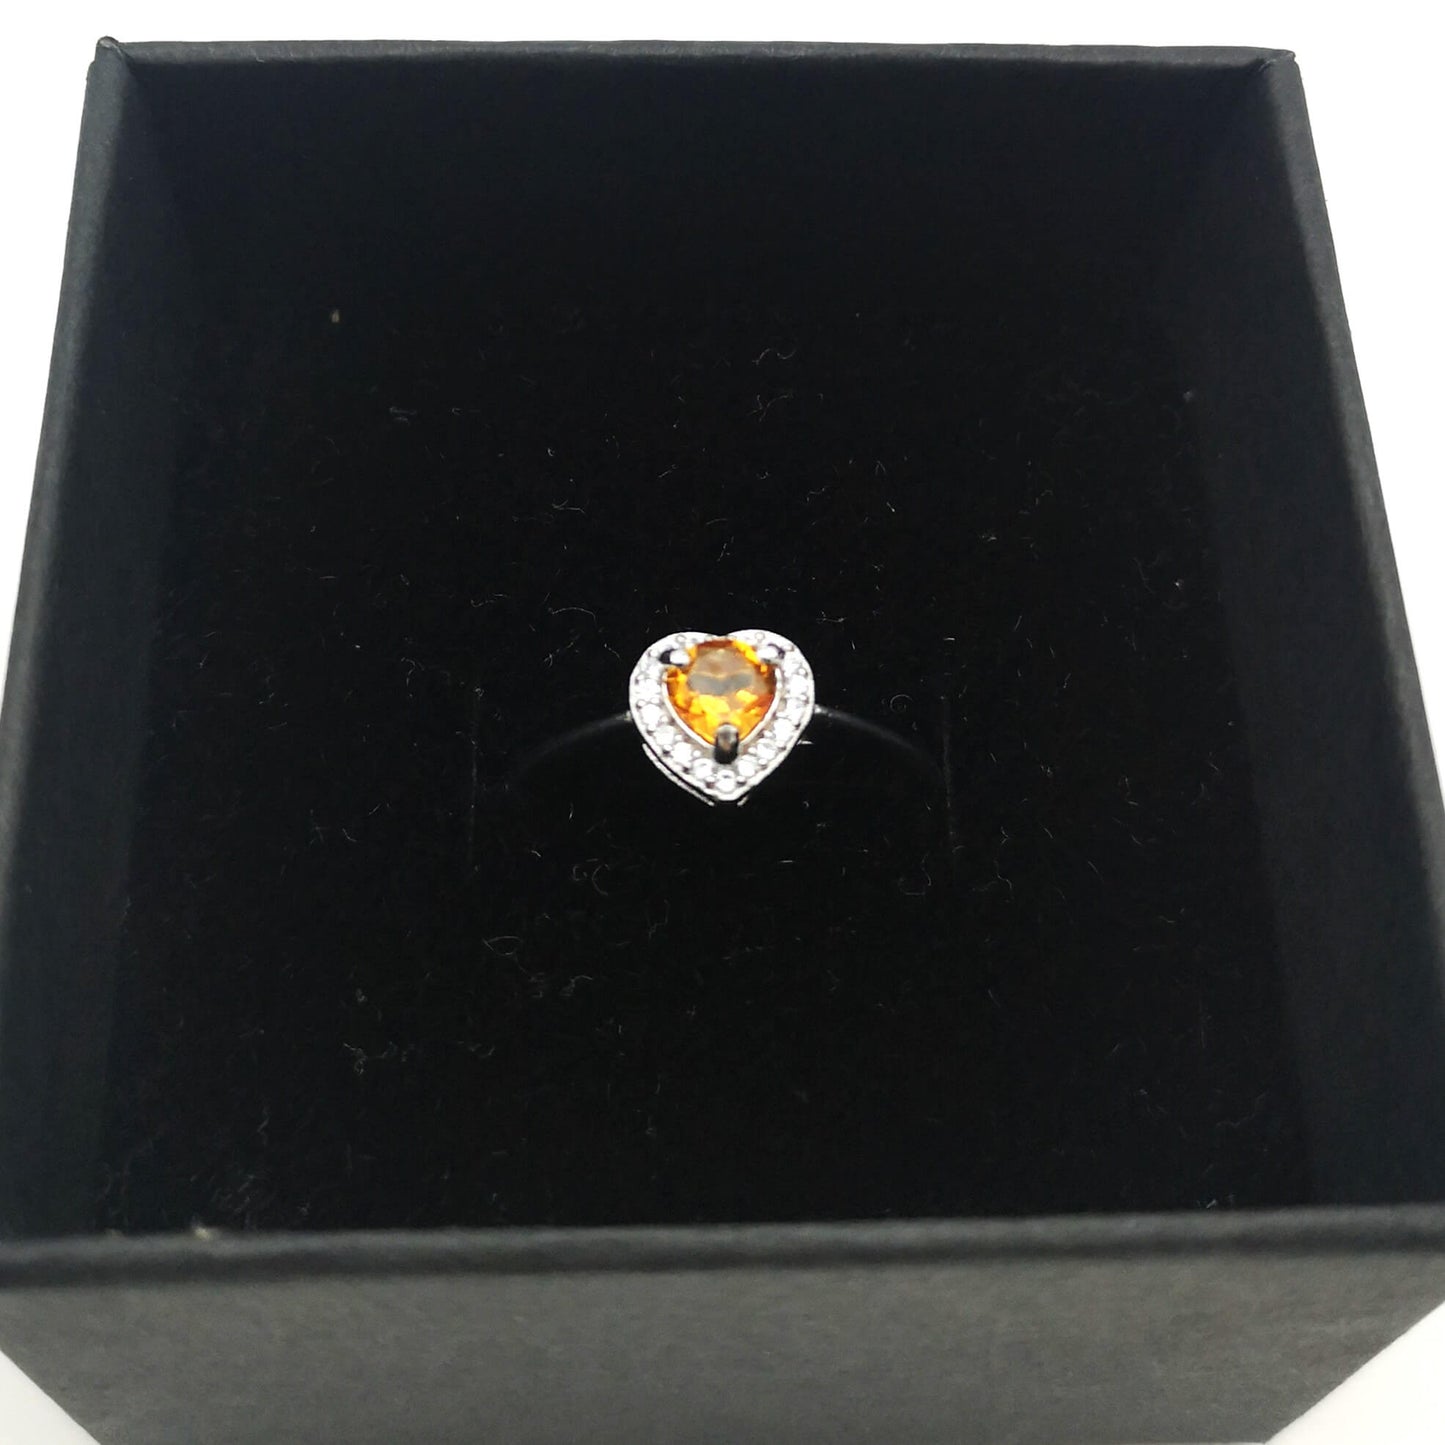 Sterling Silver Citrine & CZ Halo Heart Ring